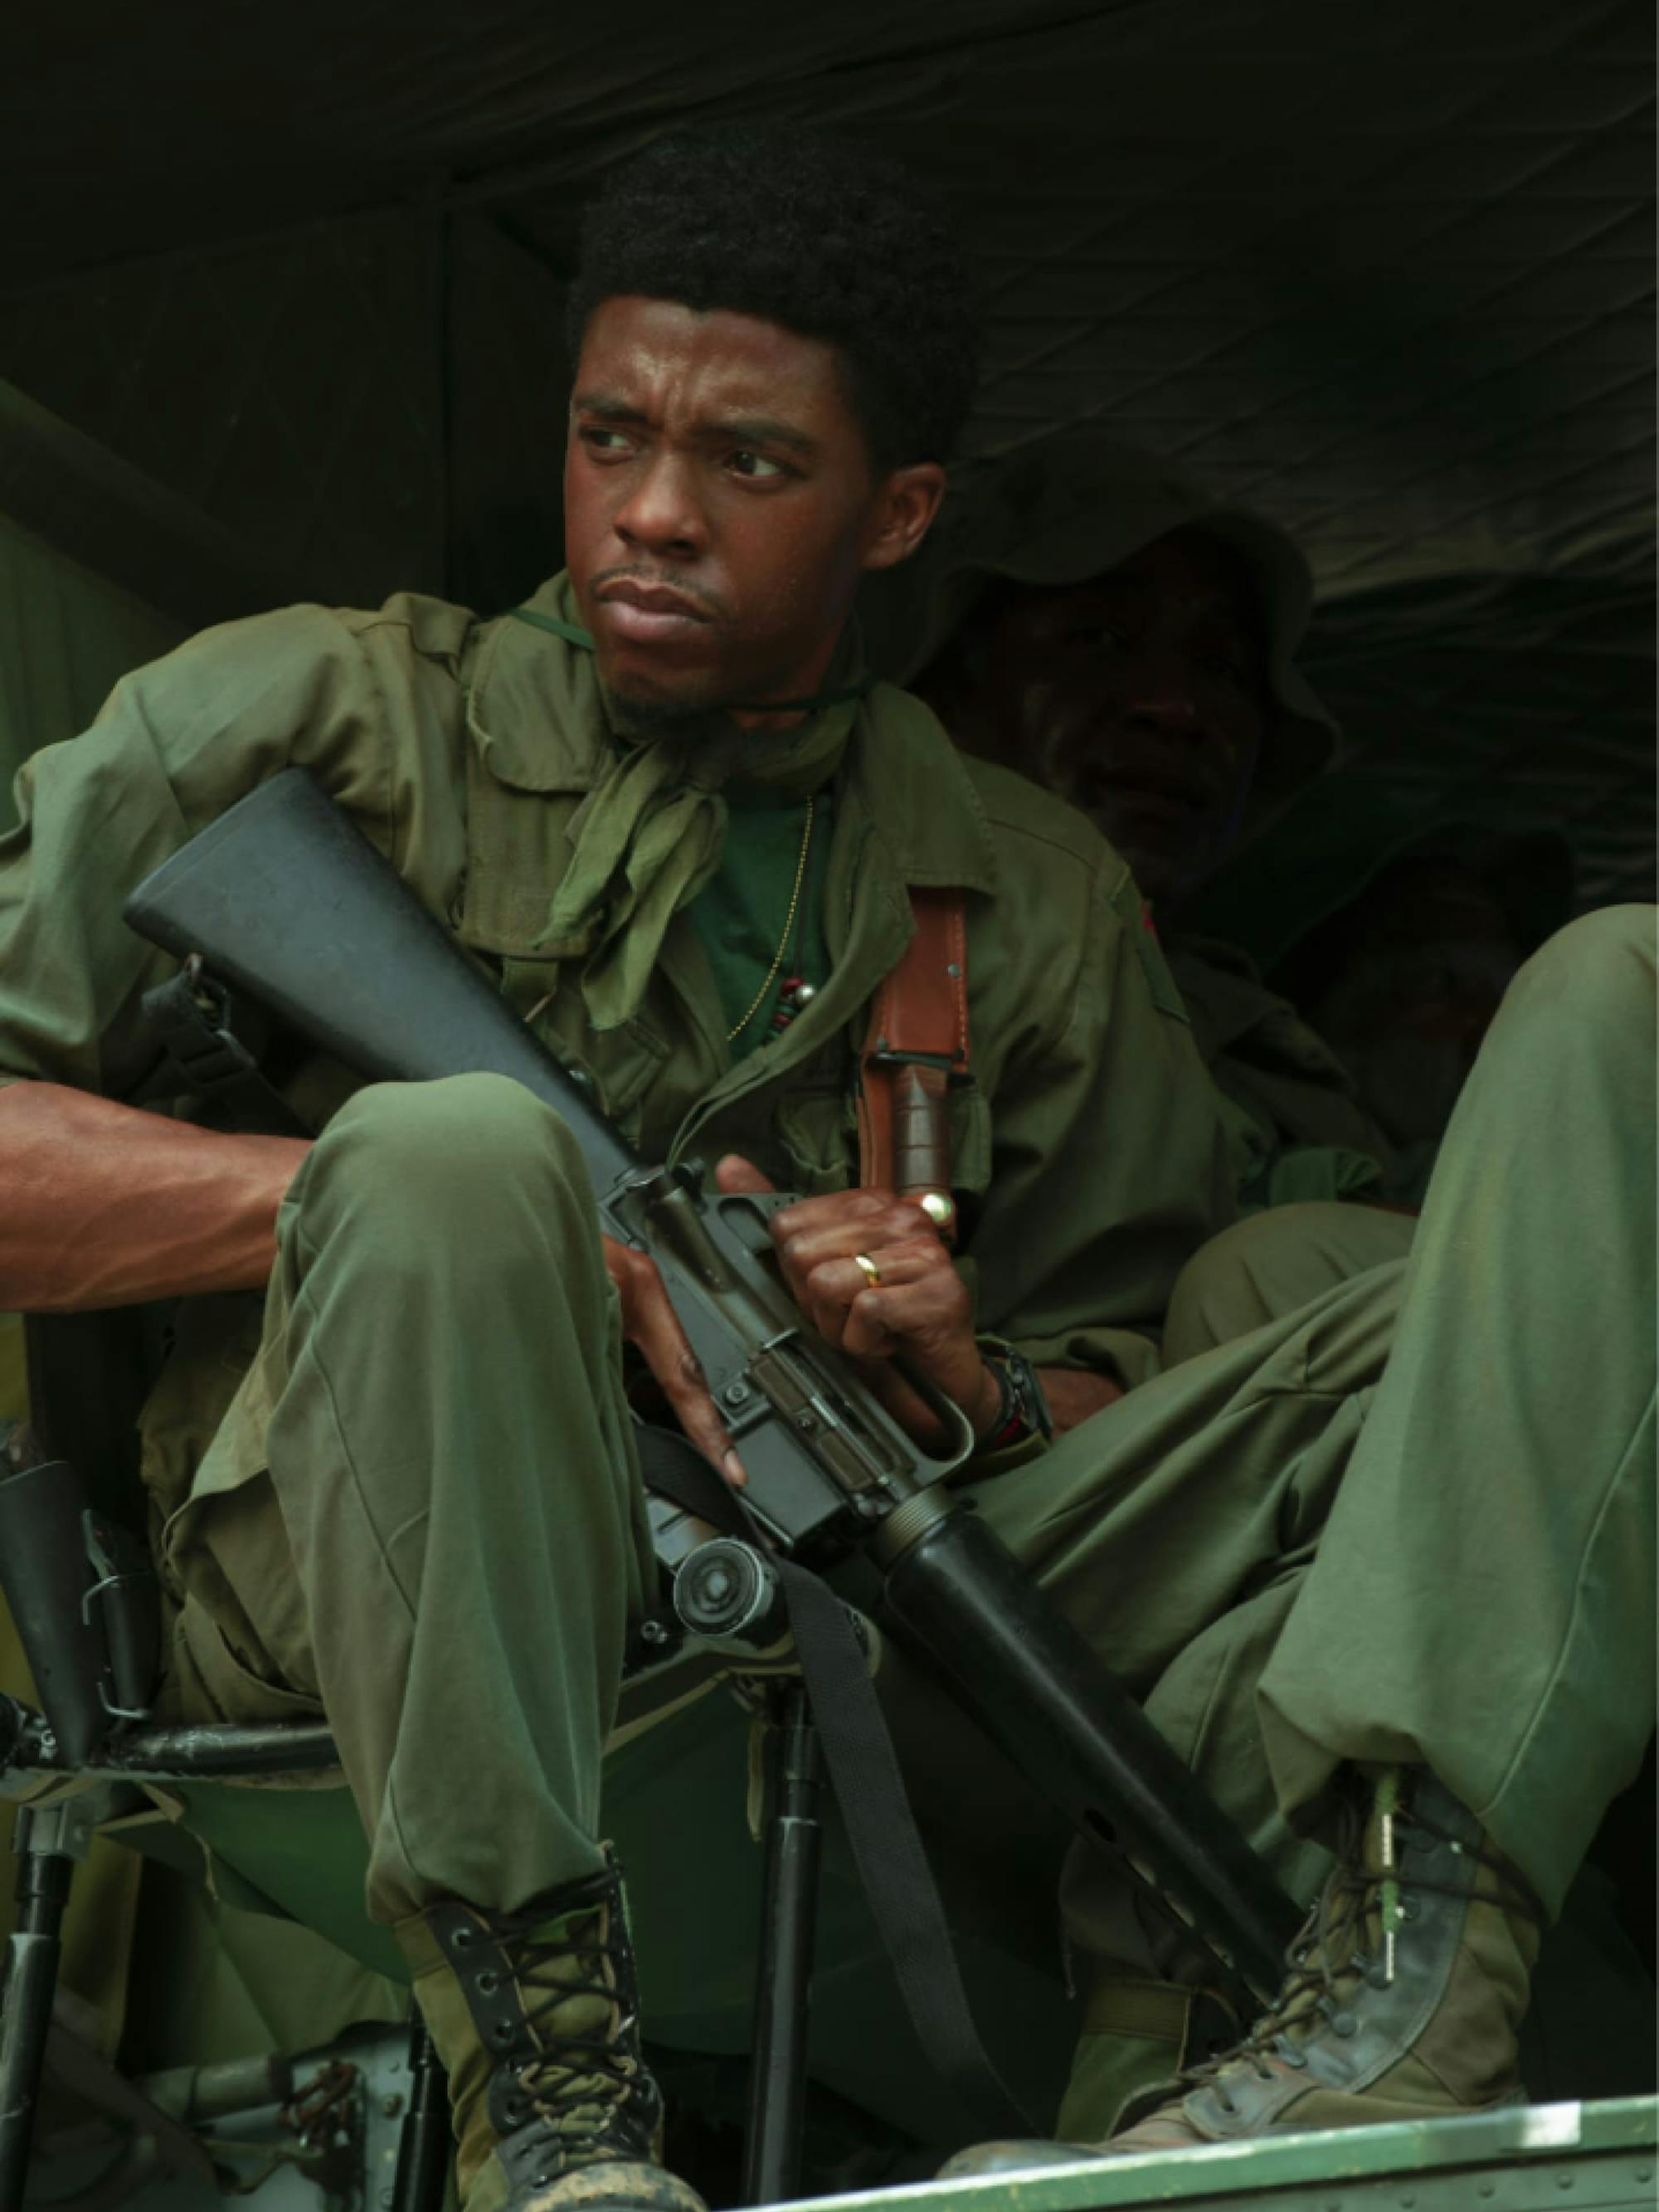 Boseman as Stormin’ Norman, wearing combat gear, boots, and holding a very large gun. He sits in a green truck and looks at something off camera. 